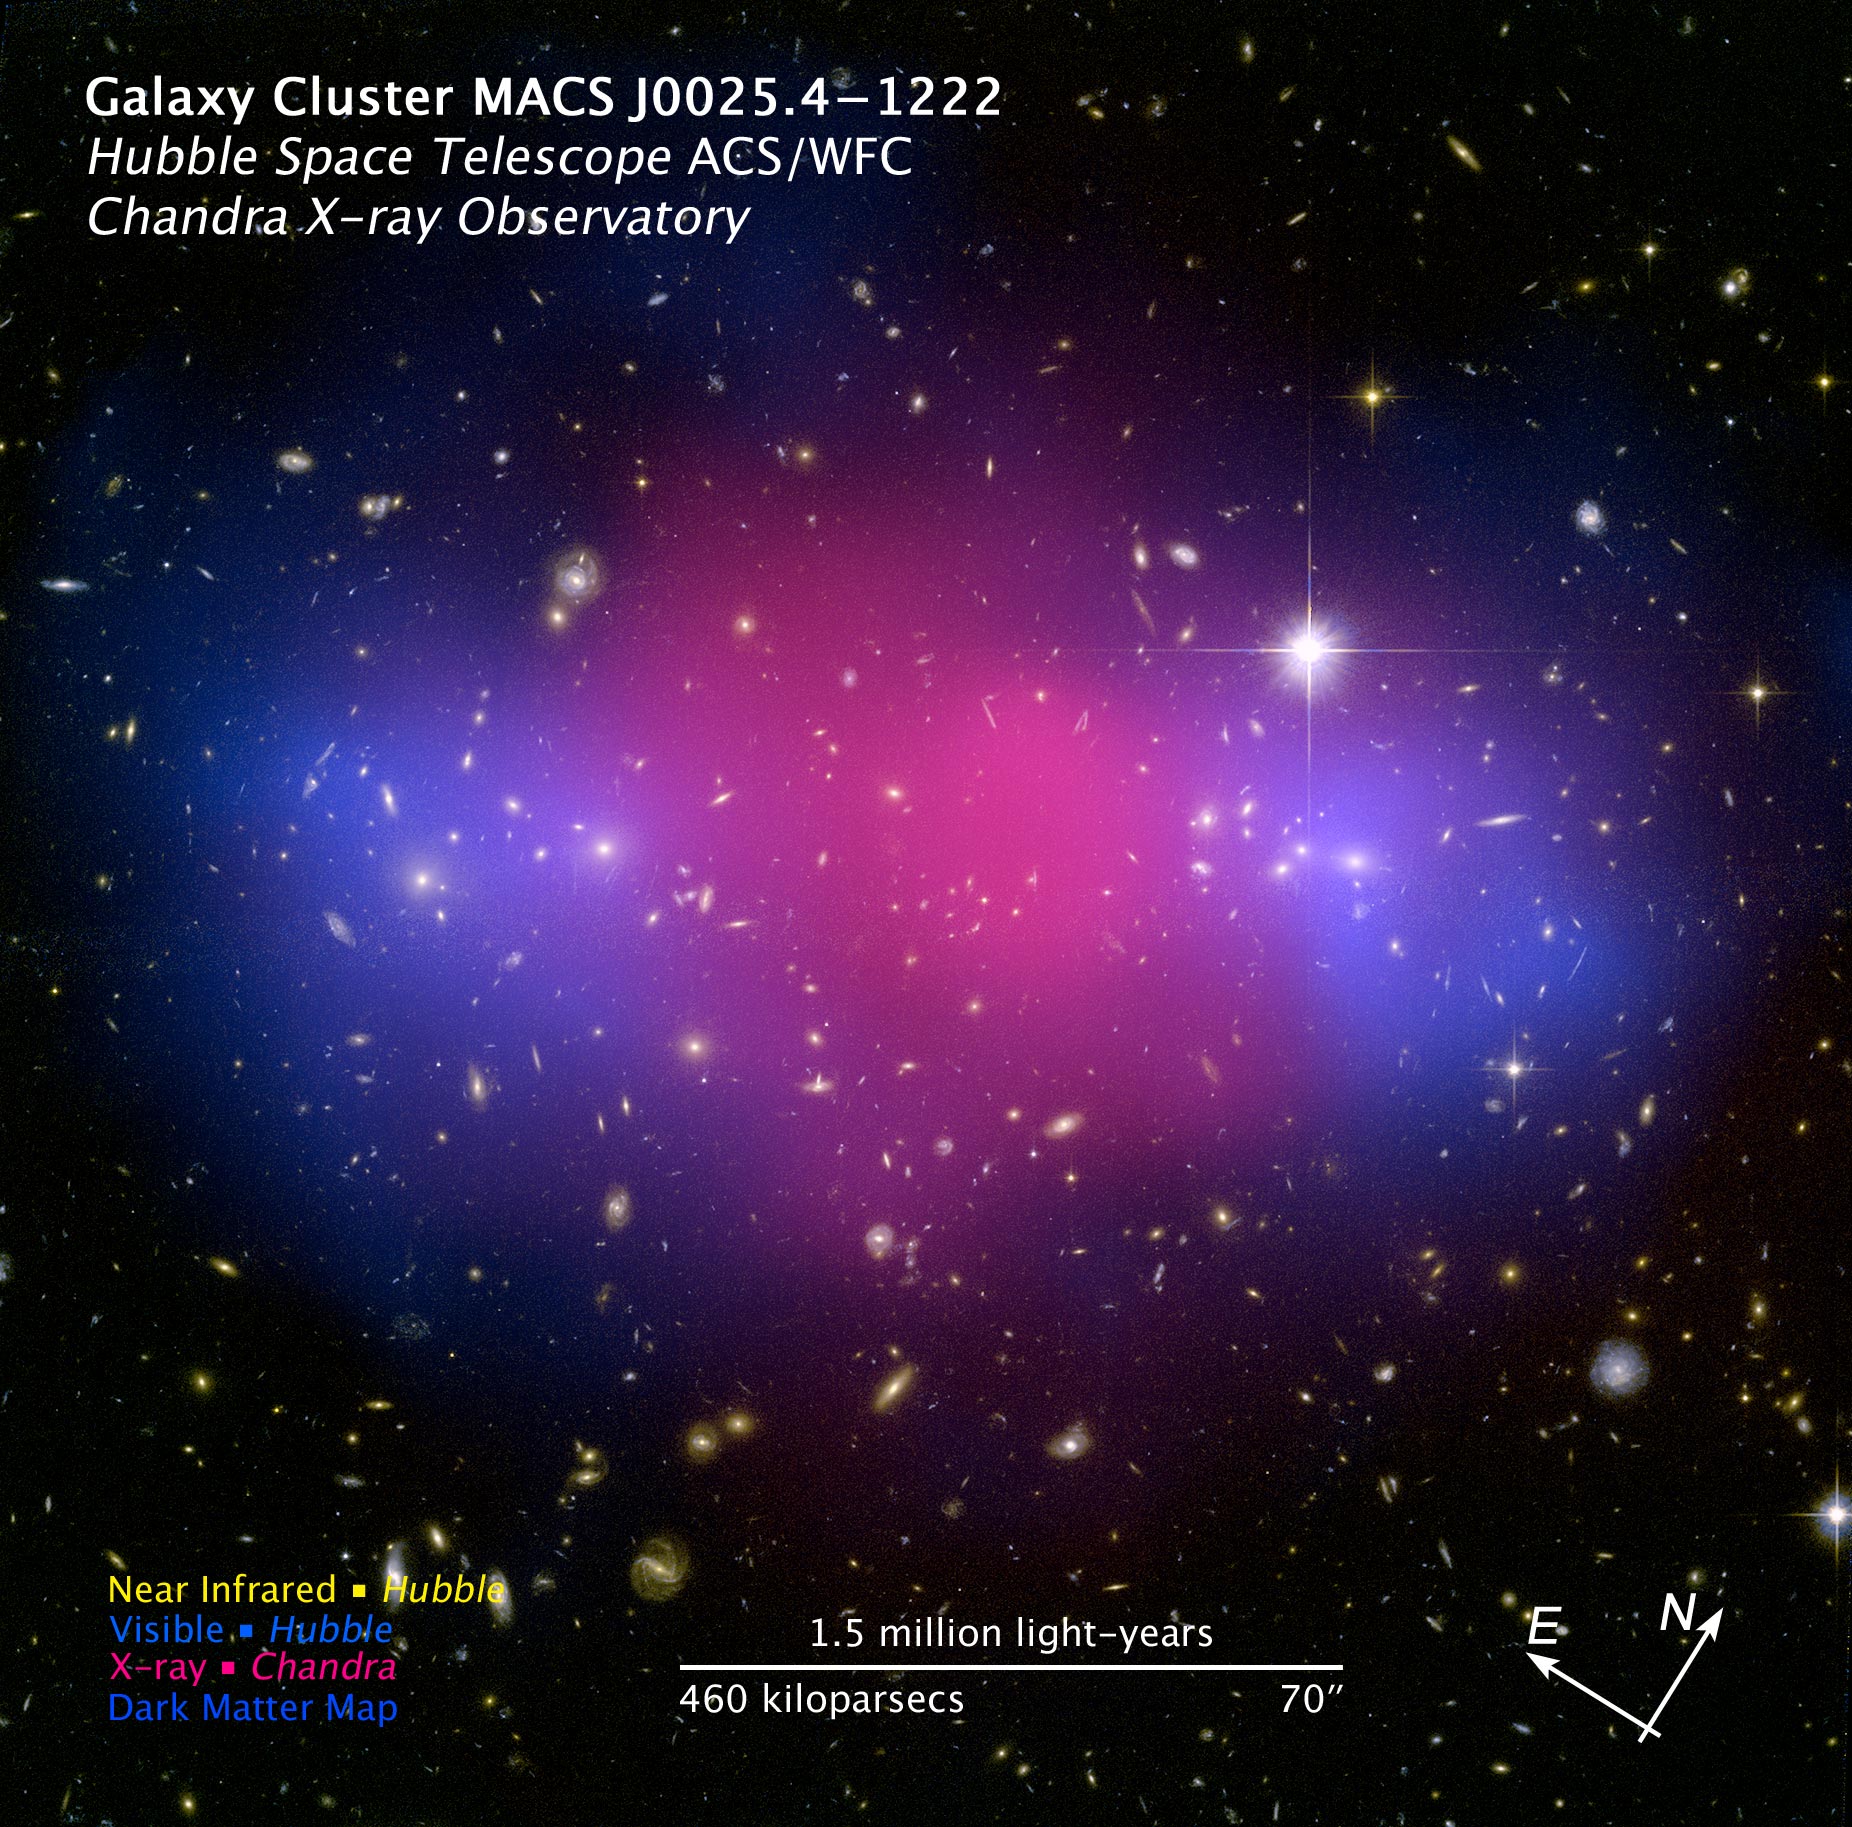 Galaxy Cluster MACS J0025.4-1222; from Hubble